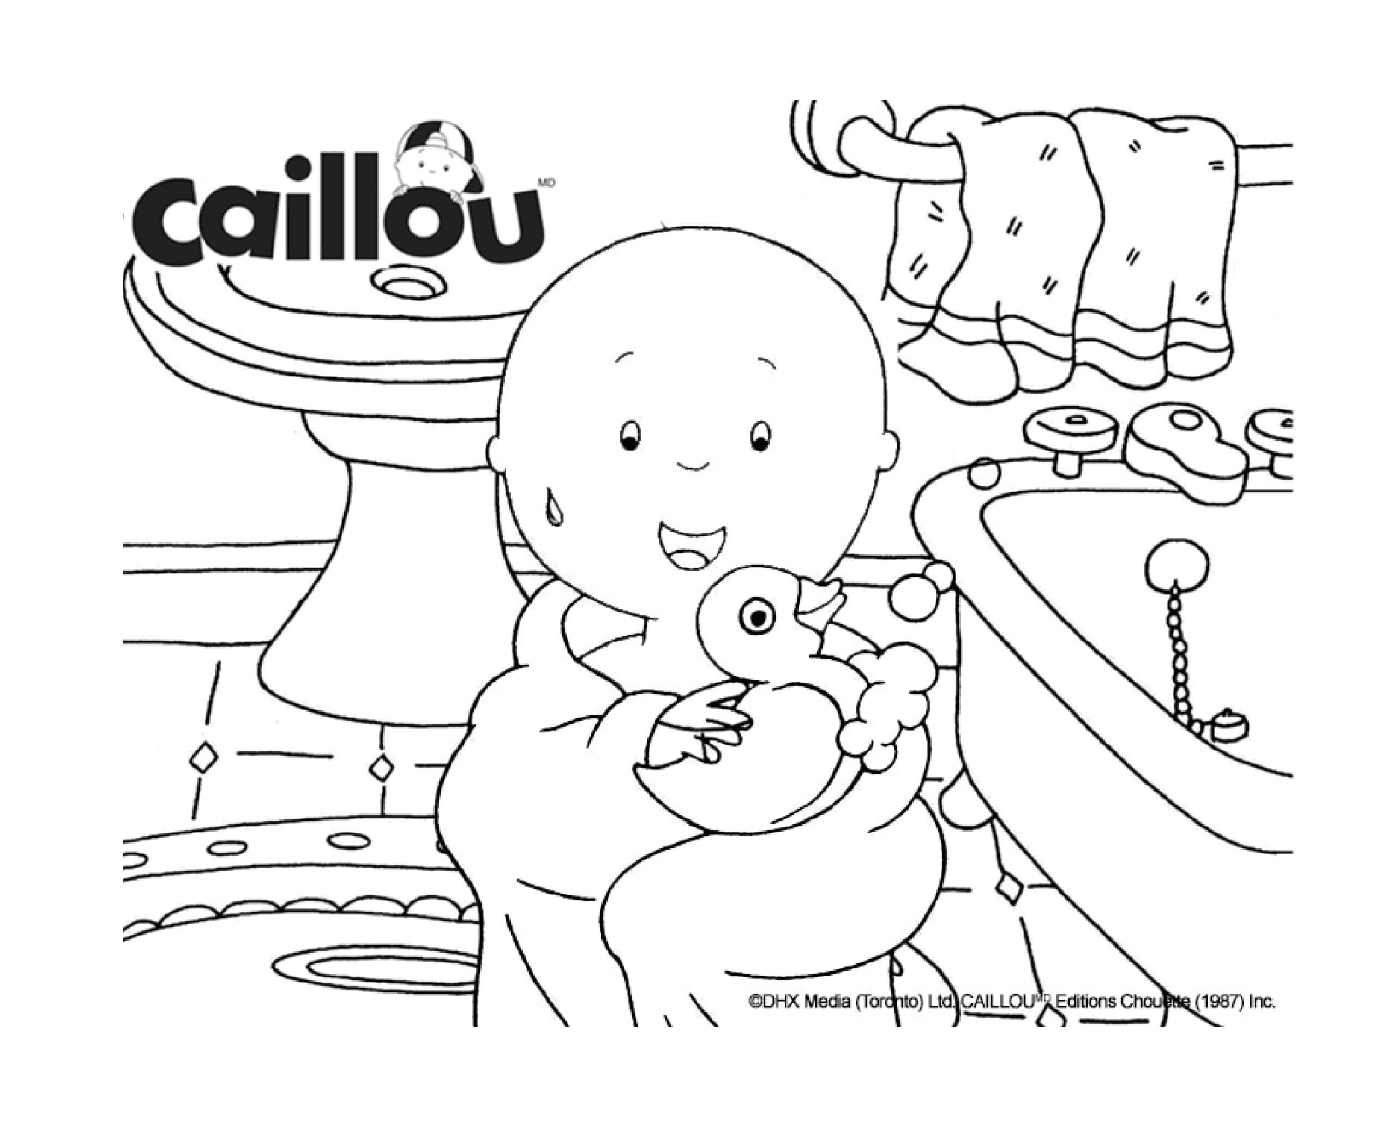  Caillou takes his bath with his duck 